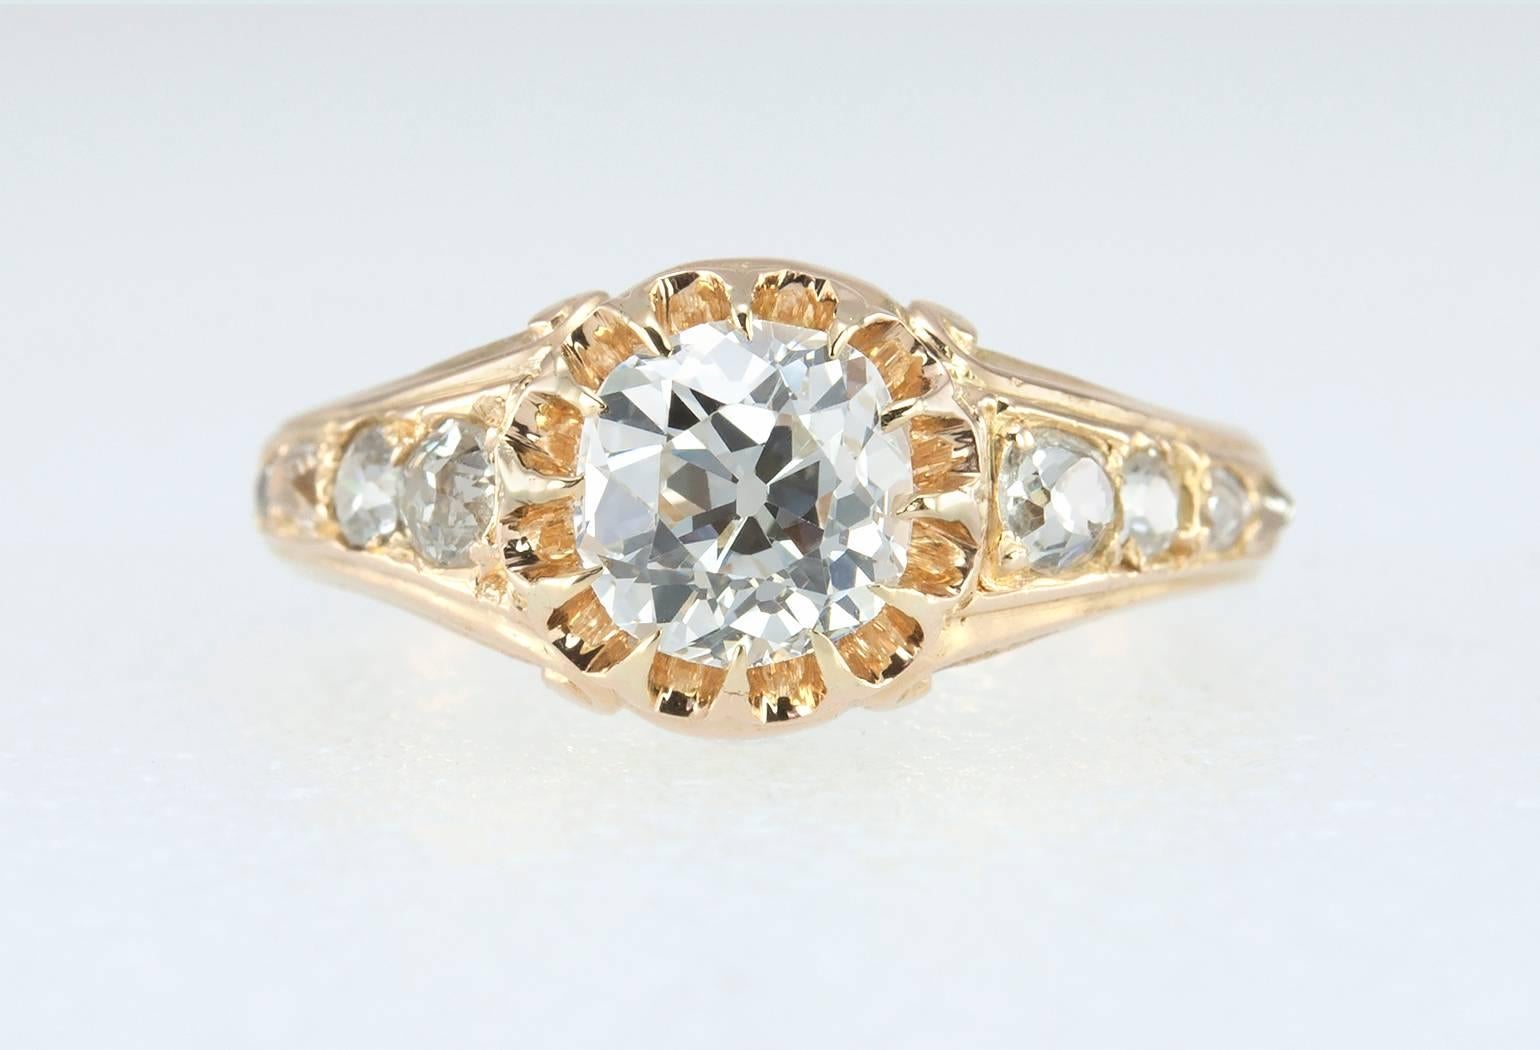 A beautiful Victorian 14 karat yellow gold diamond engagement from circa 1890s-1900.  This special ring features a center 1.00 carat Old Mine Cut diamond that is G in color and VS2 in clarity (per EGL certificate).  Each shoulder of the ring also